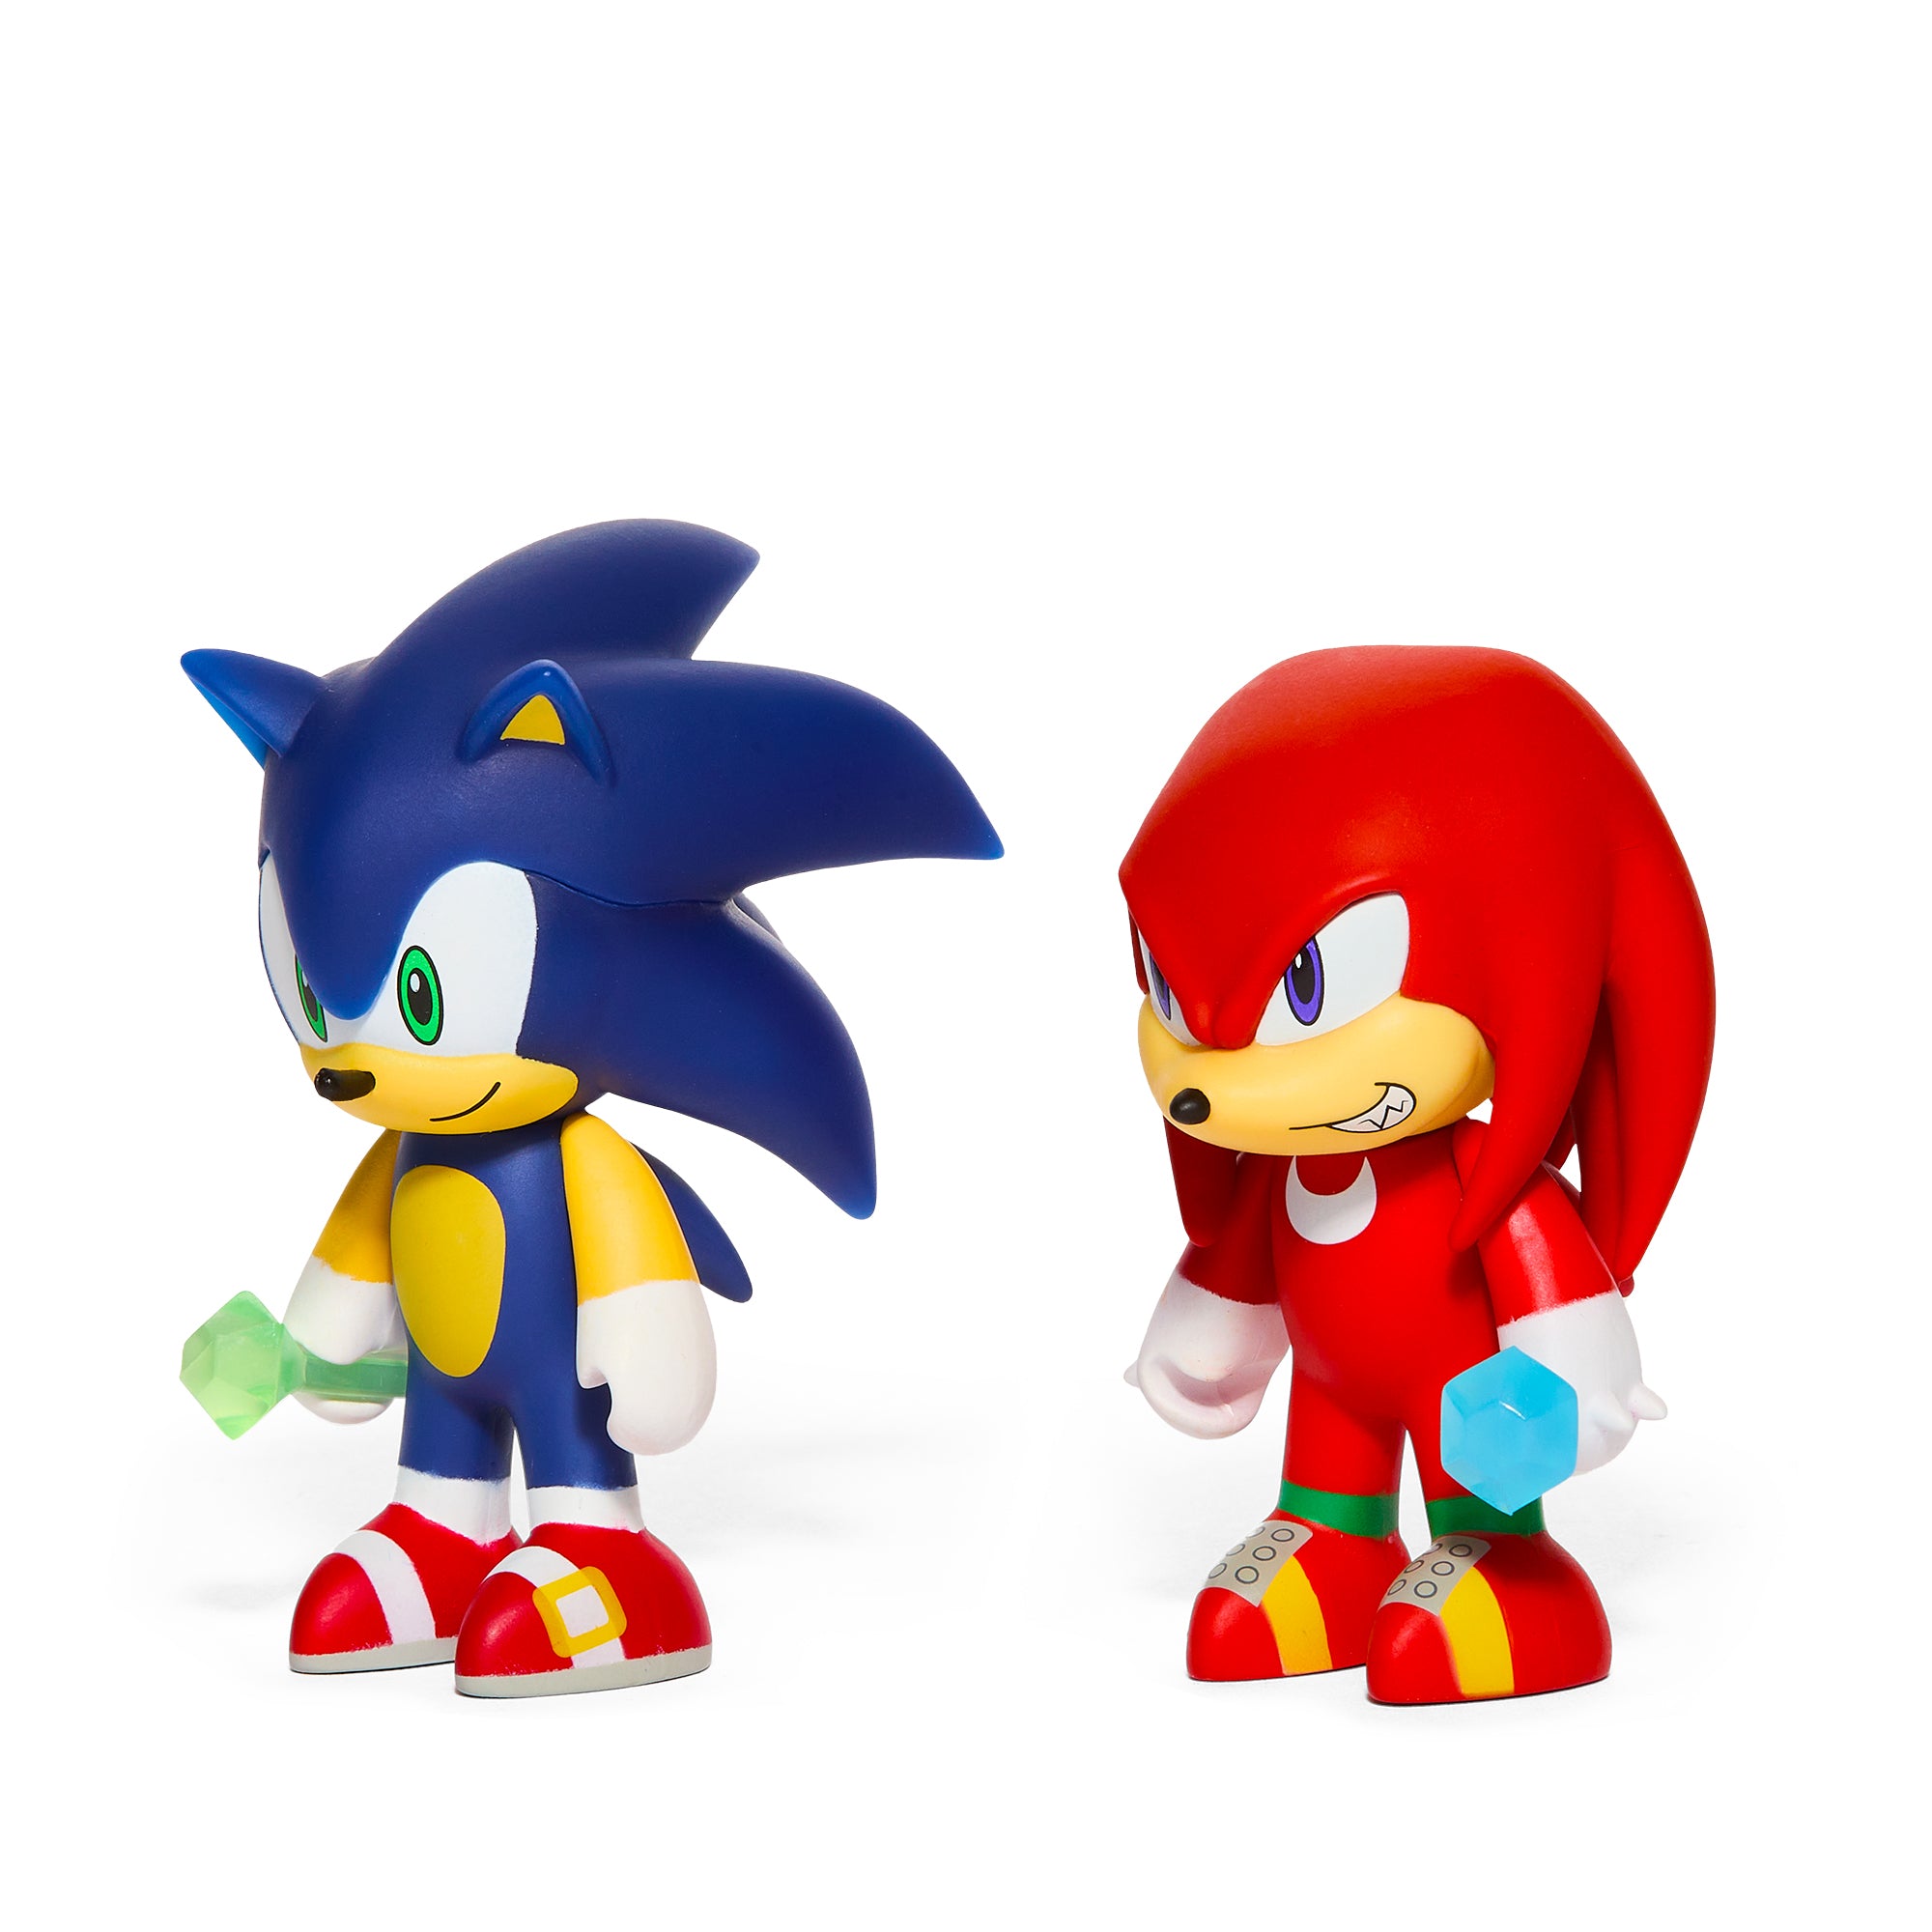 sonic-the-hedgehog-3-vinyl-figure-sonic-and-tails-2-pack-lupon-gov-ph